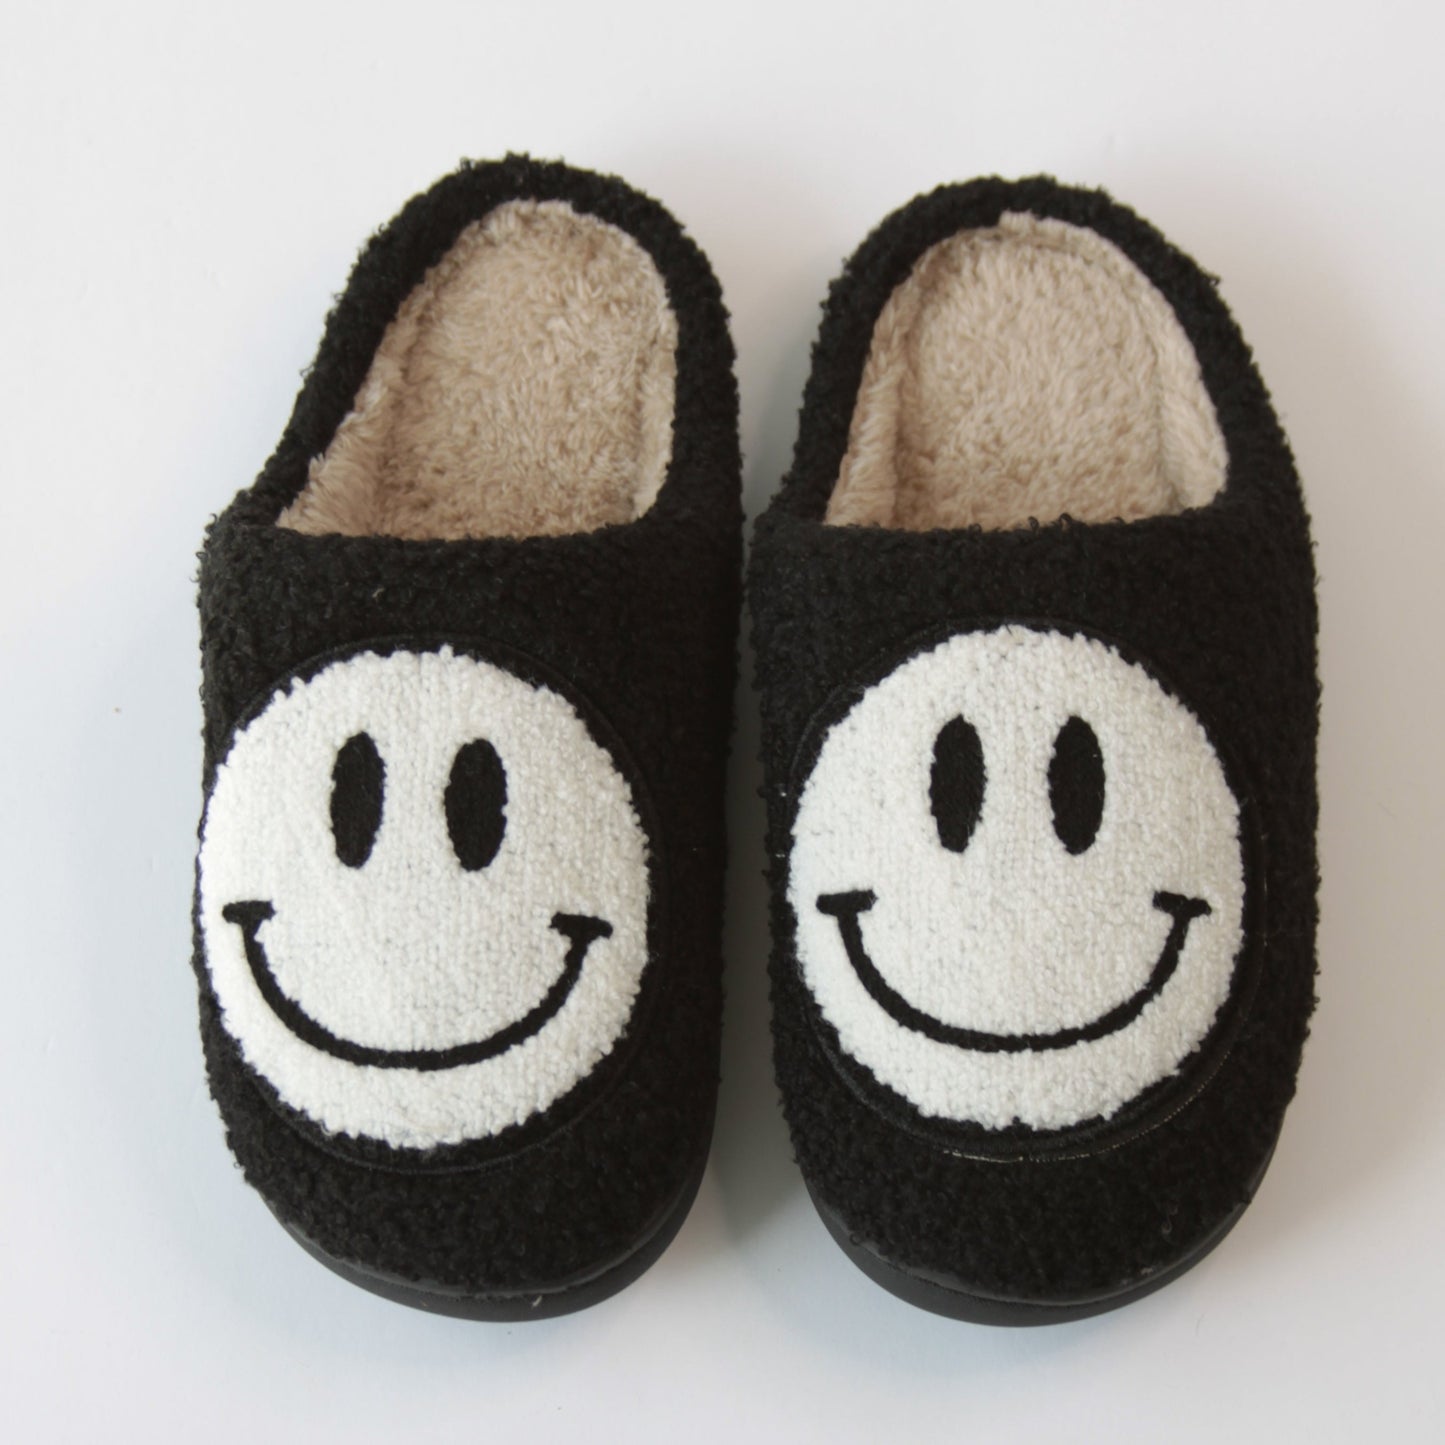 Black and White Happy Slippers